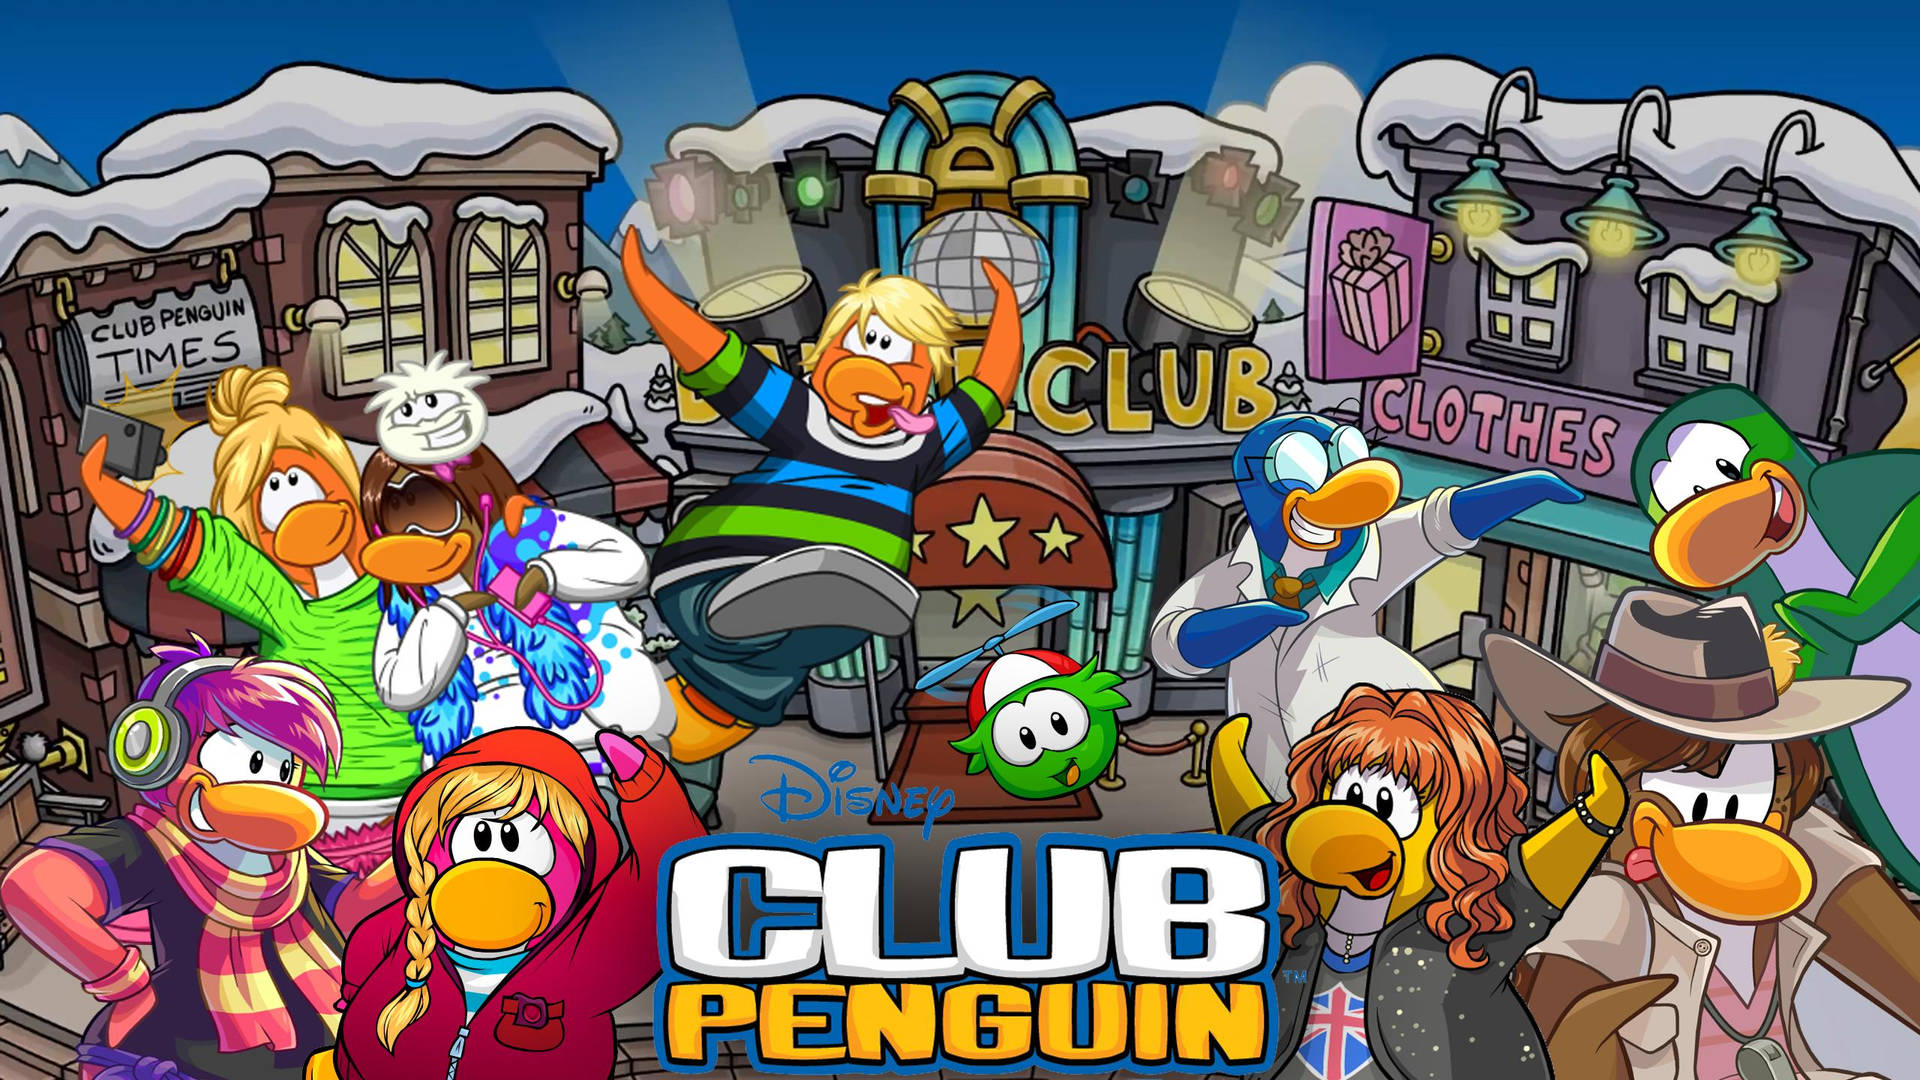 Club Penguin In A Club Dancing Background